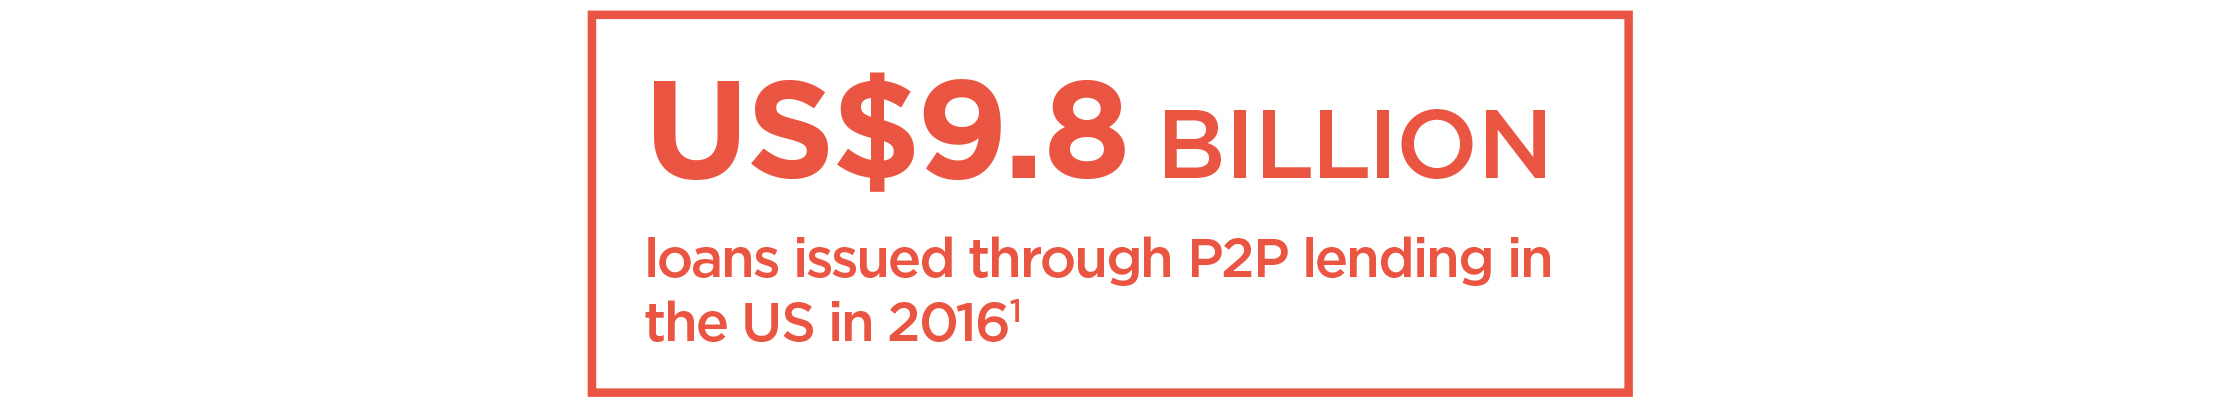 US$9.8 BILLION loans issued through P2P lending in the US in 2016